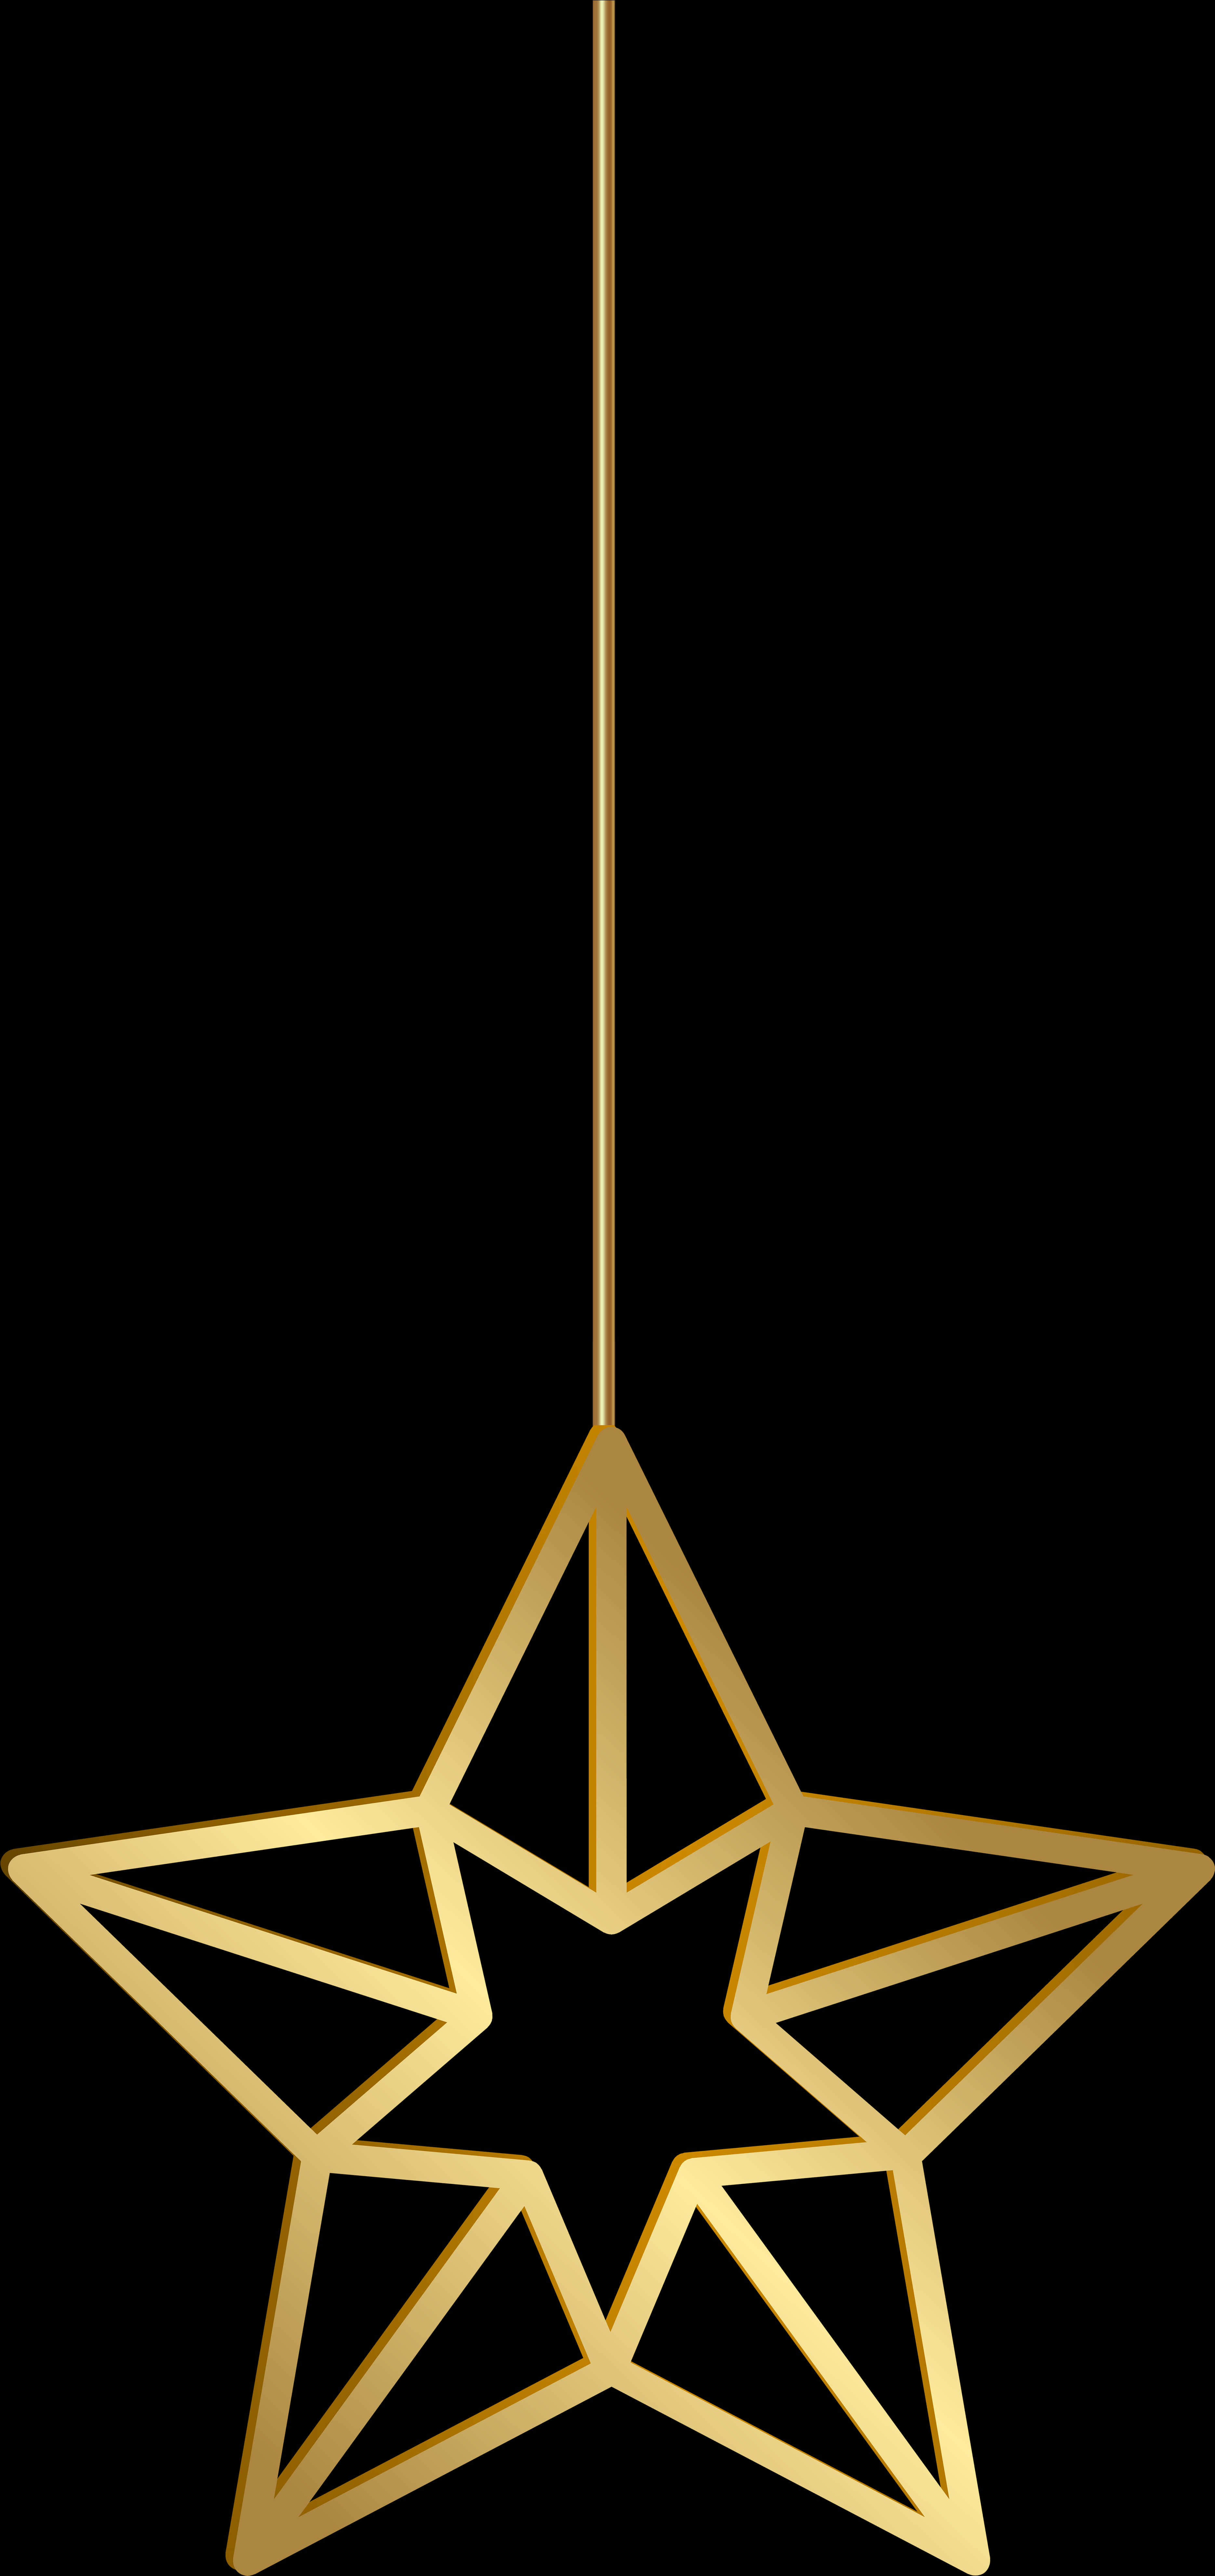 A Gold Star From A String